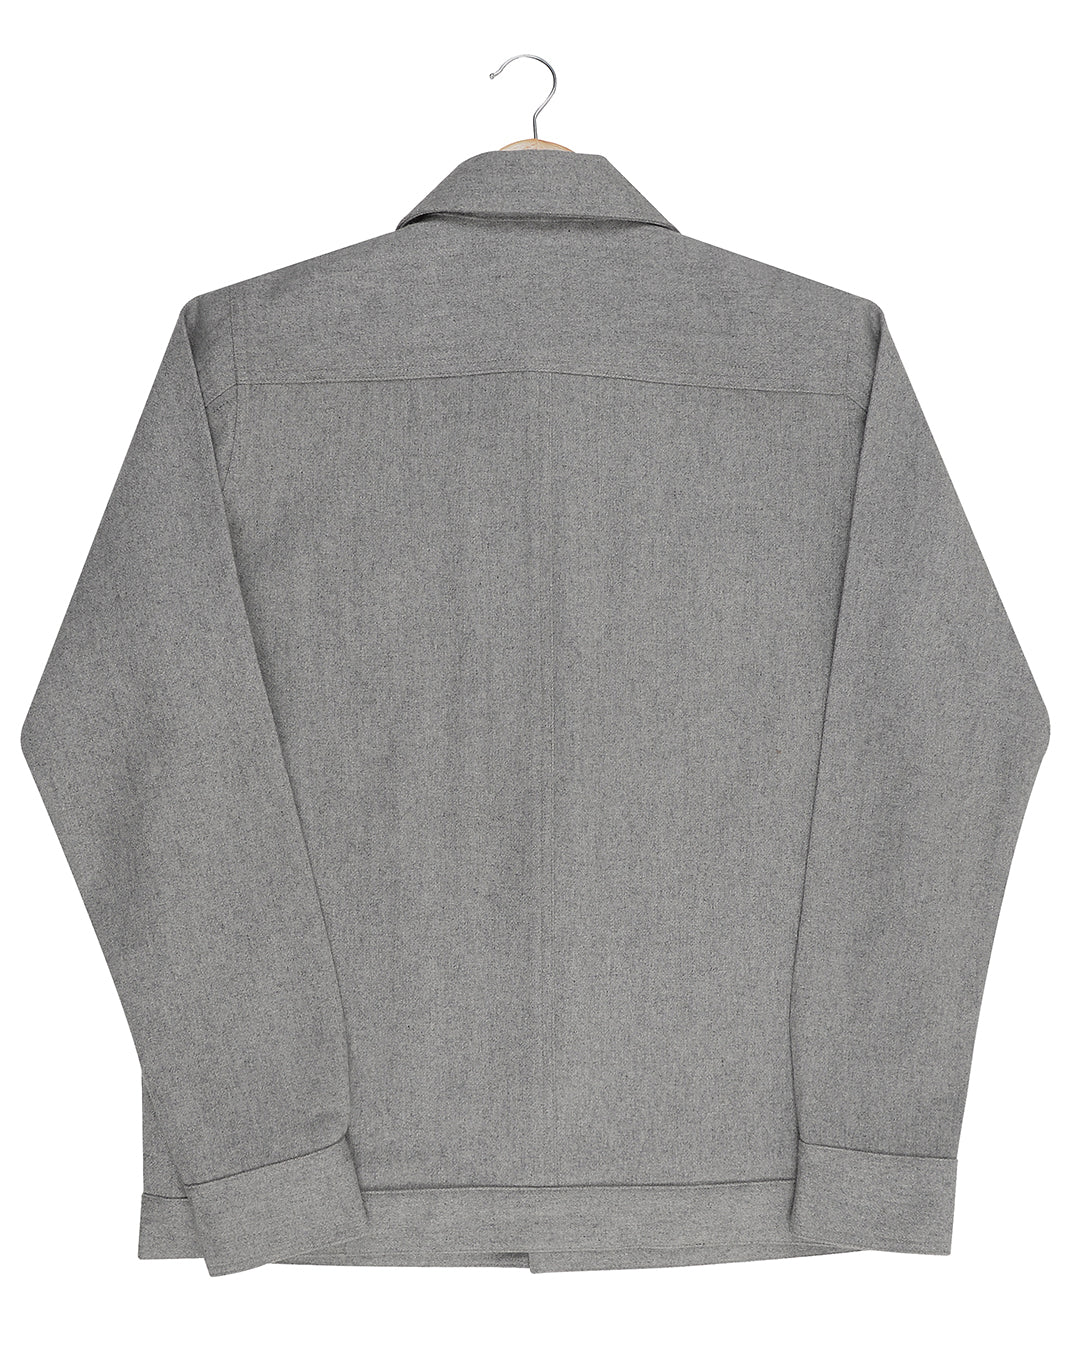 Back of the recycled wool shirt jacket for men by Luxire in grey